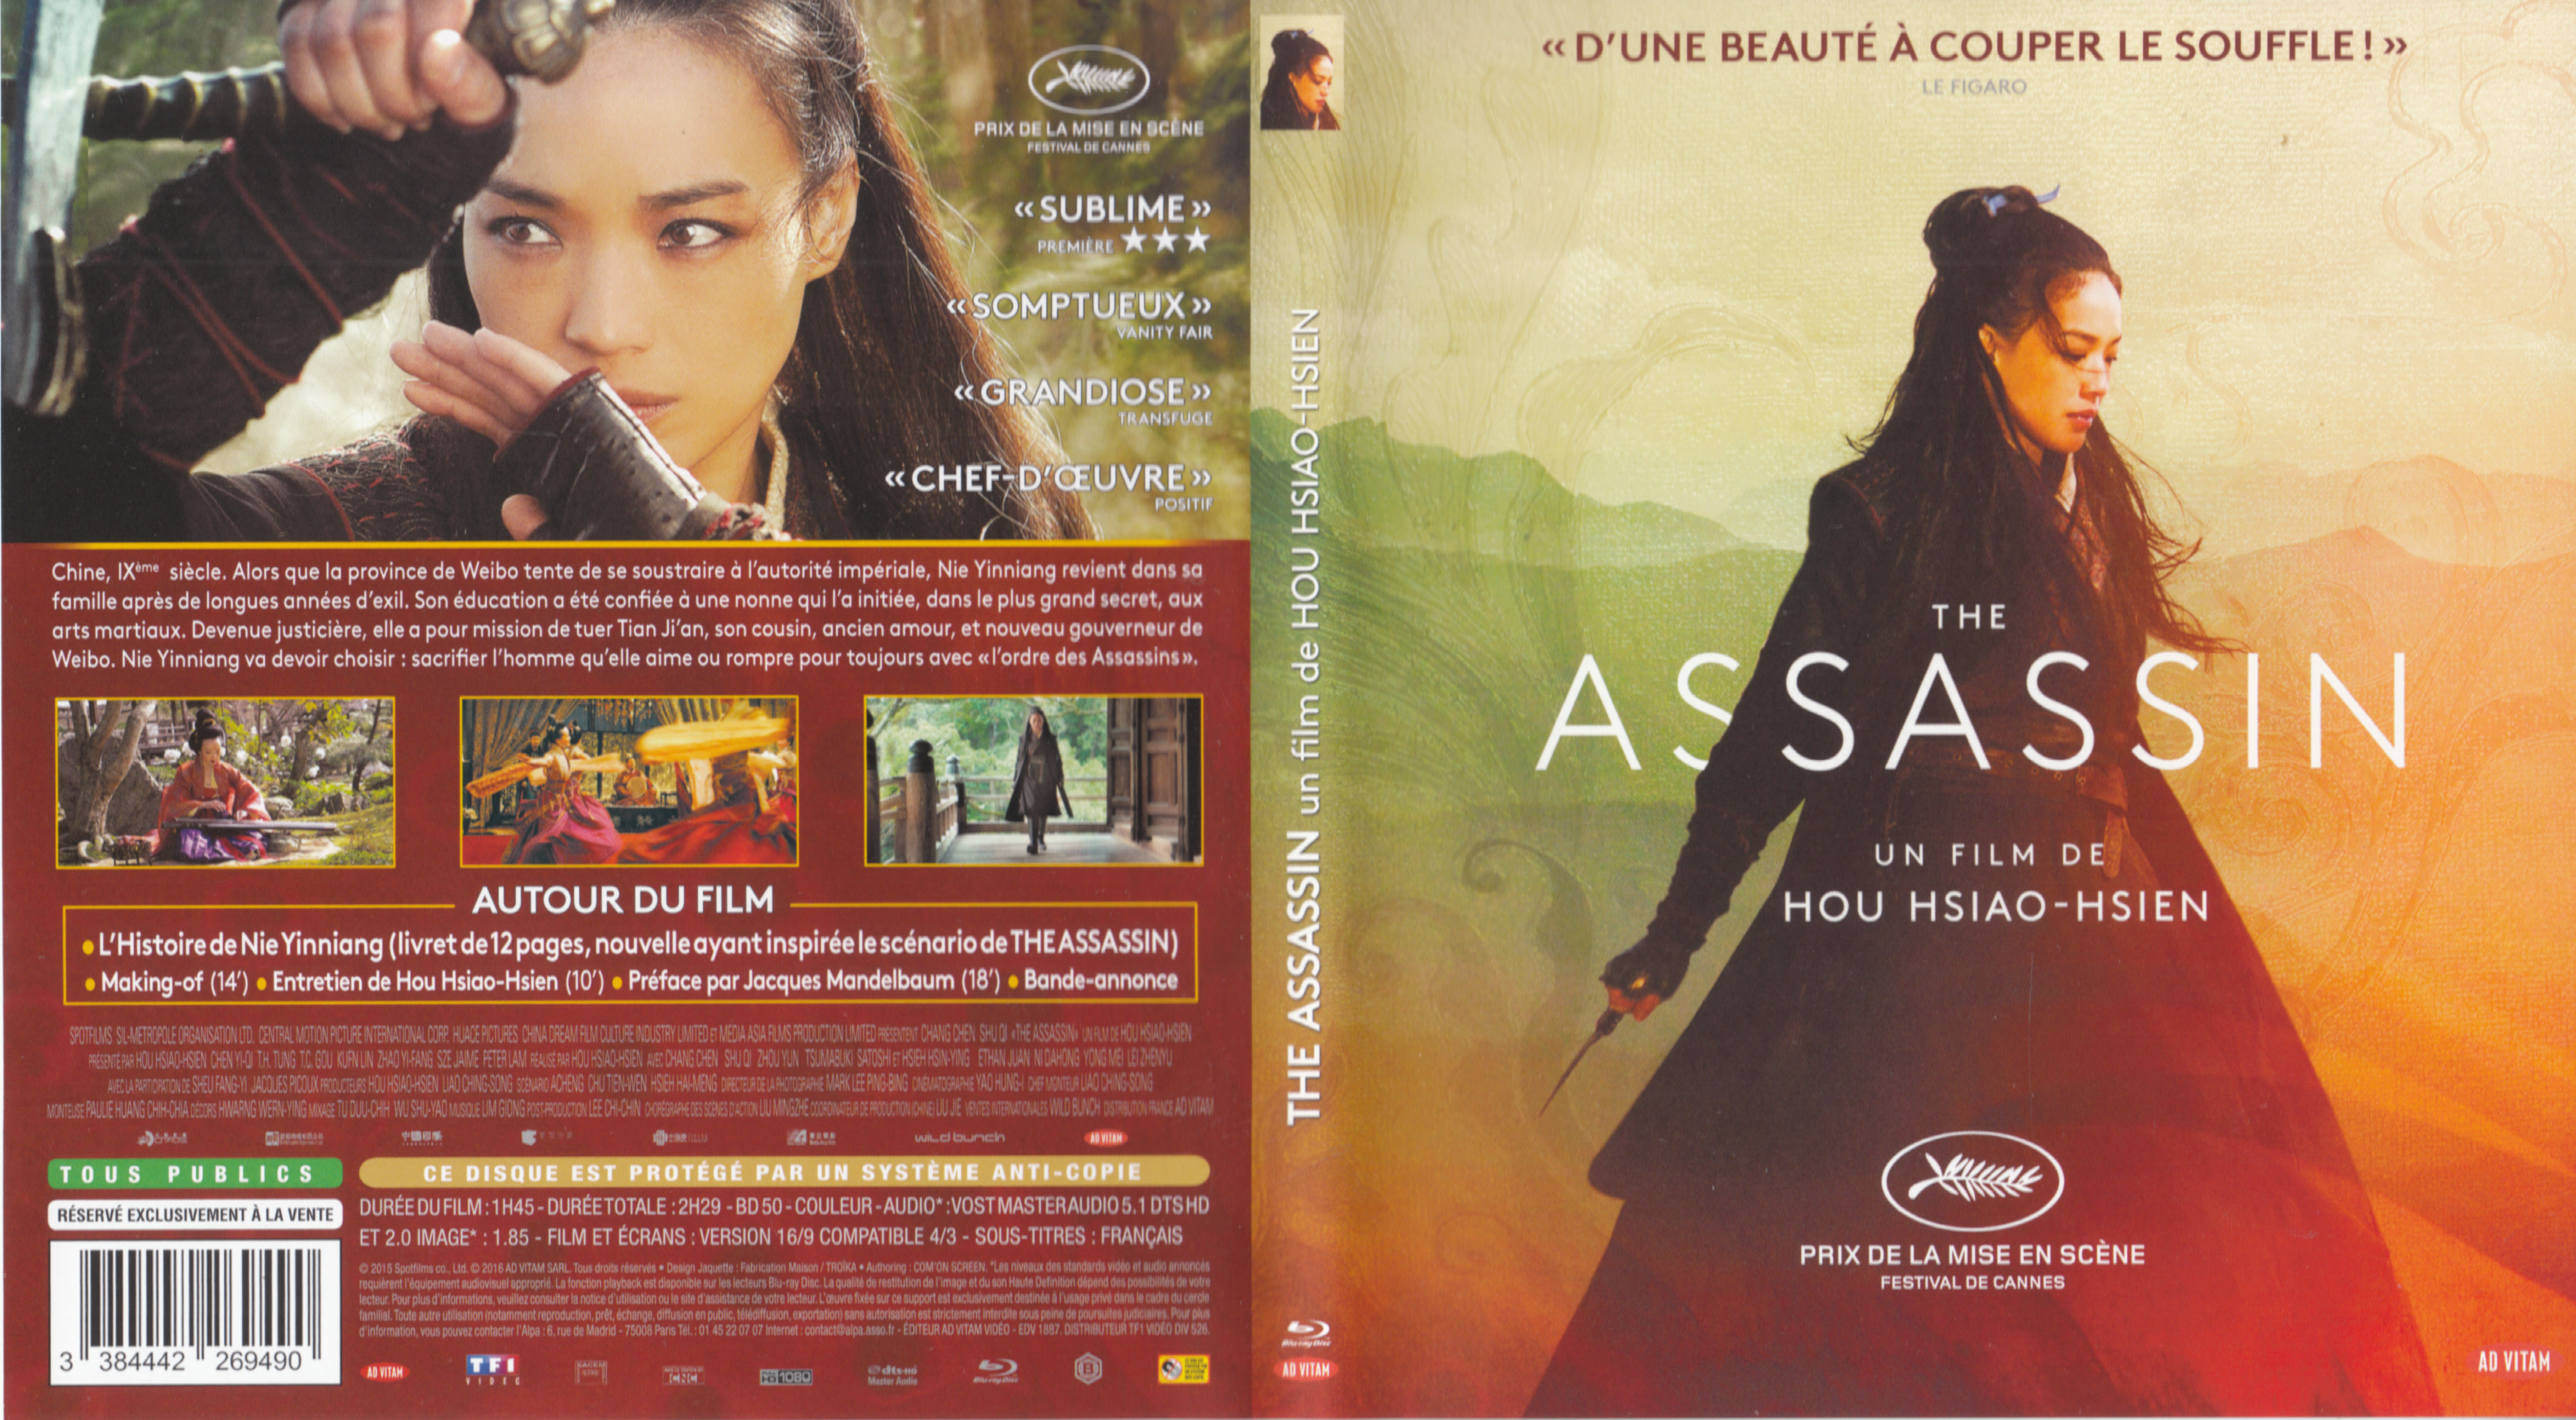 Jaquette DVD The assassin (BLU-RAY)